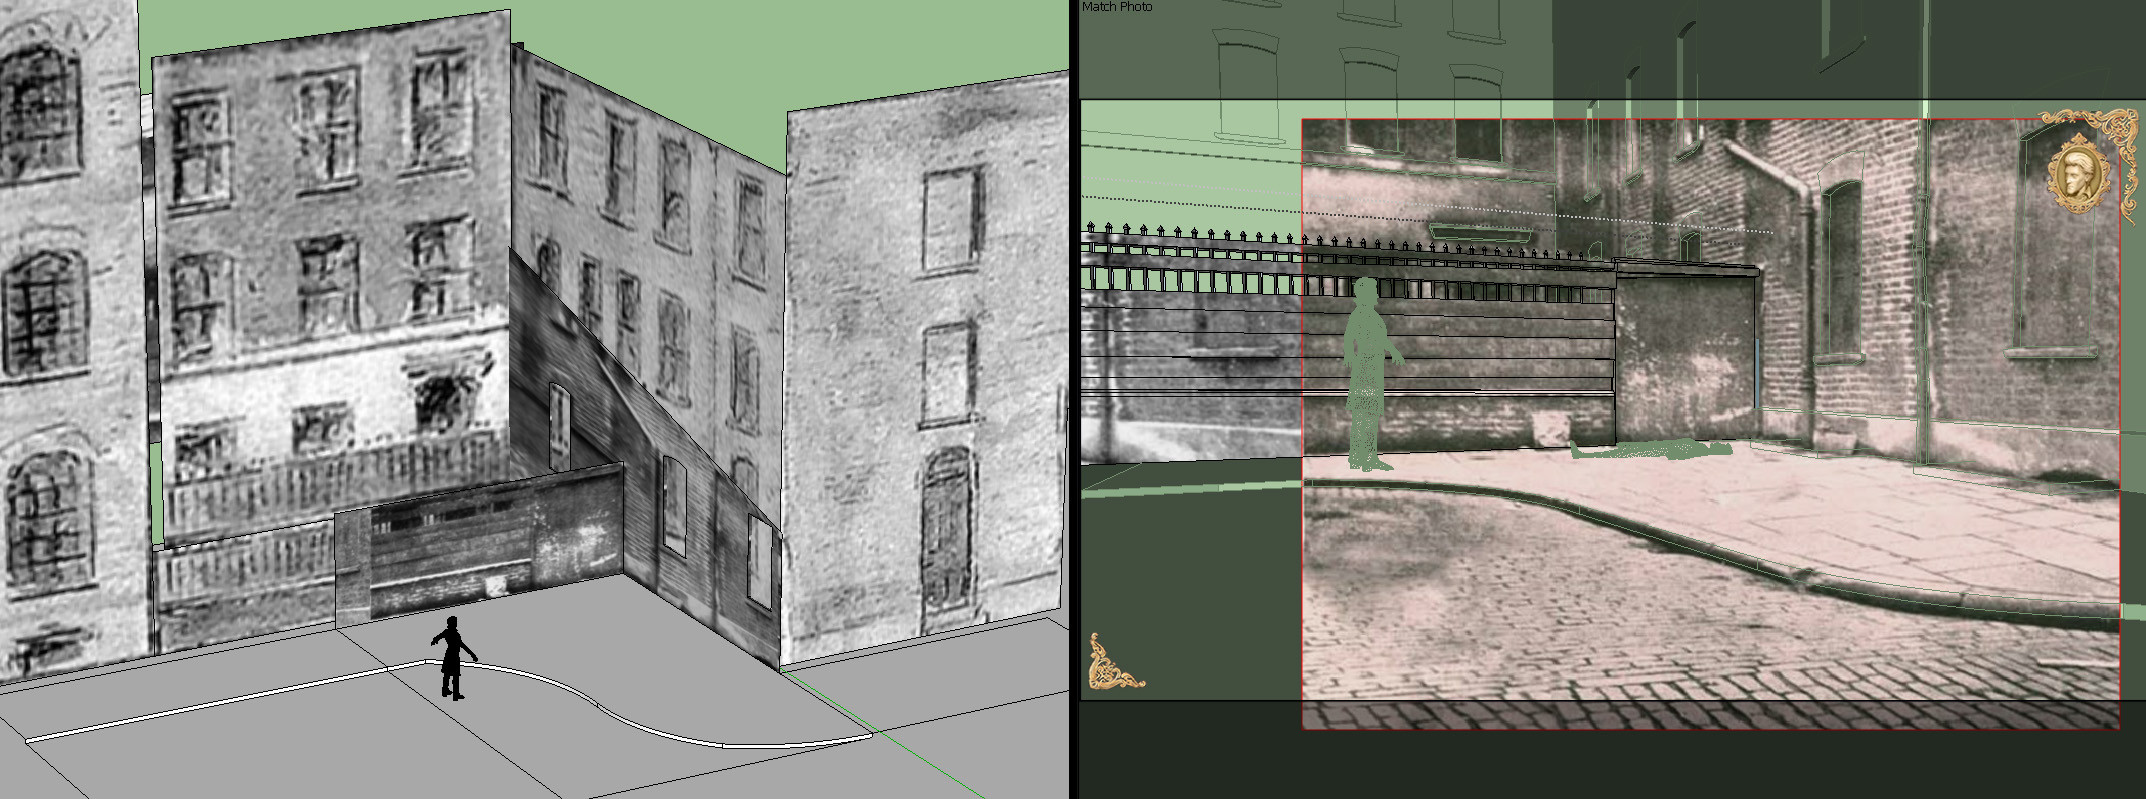 I used the illustration as a starting point and turned it into a 3D scene in Sketchup. I then used the contemporary photo to get the geometric details of the crime scene as accurate as possible to what it looked like at the time.